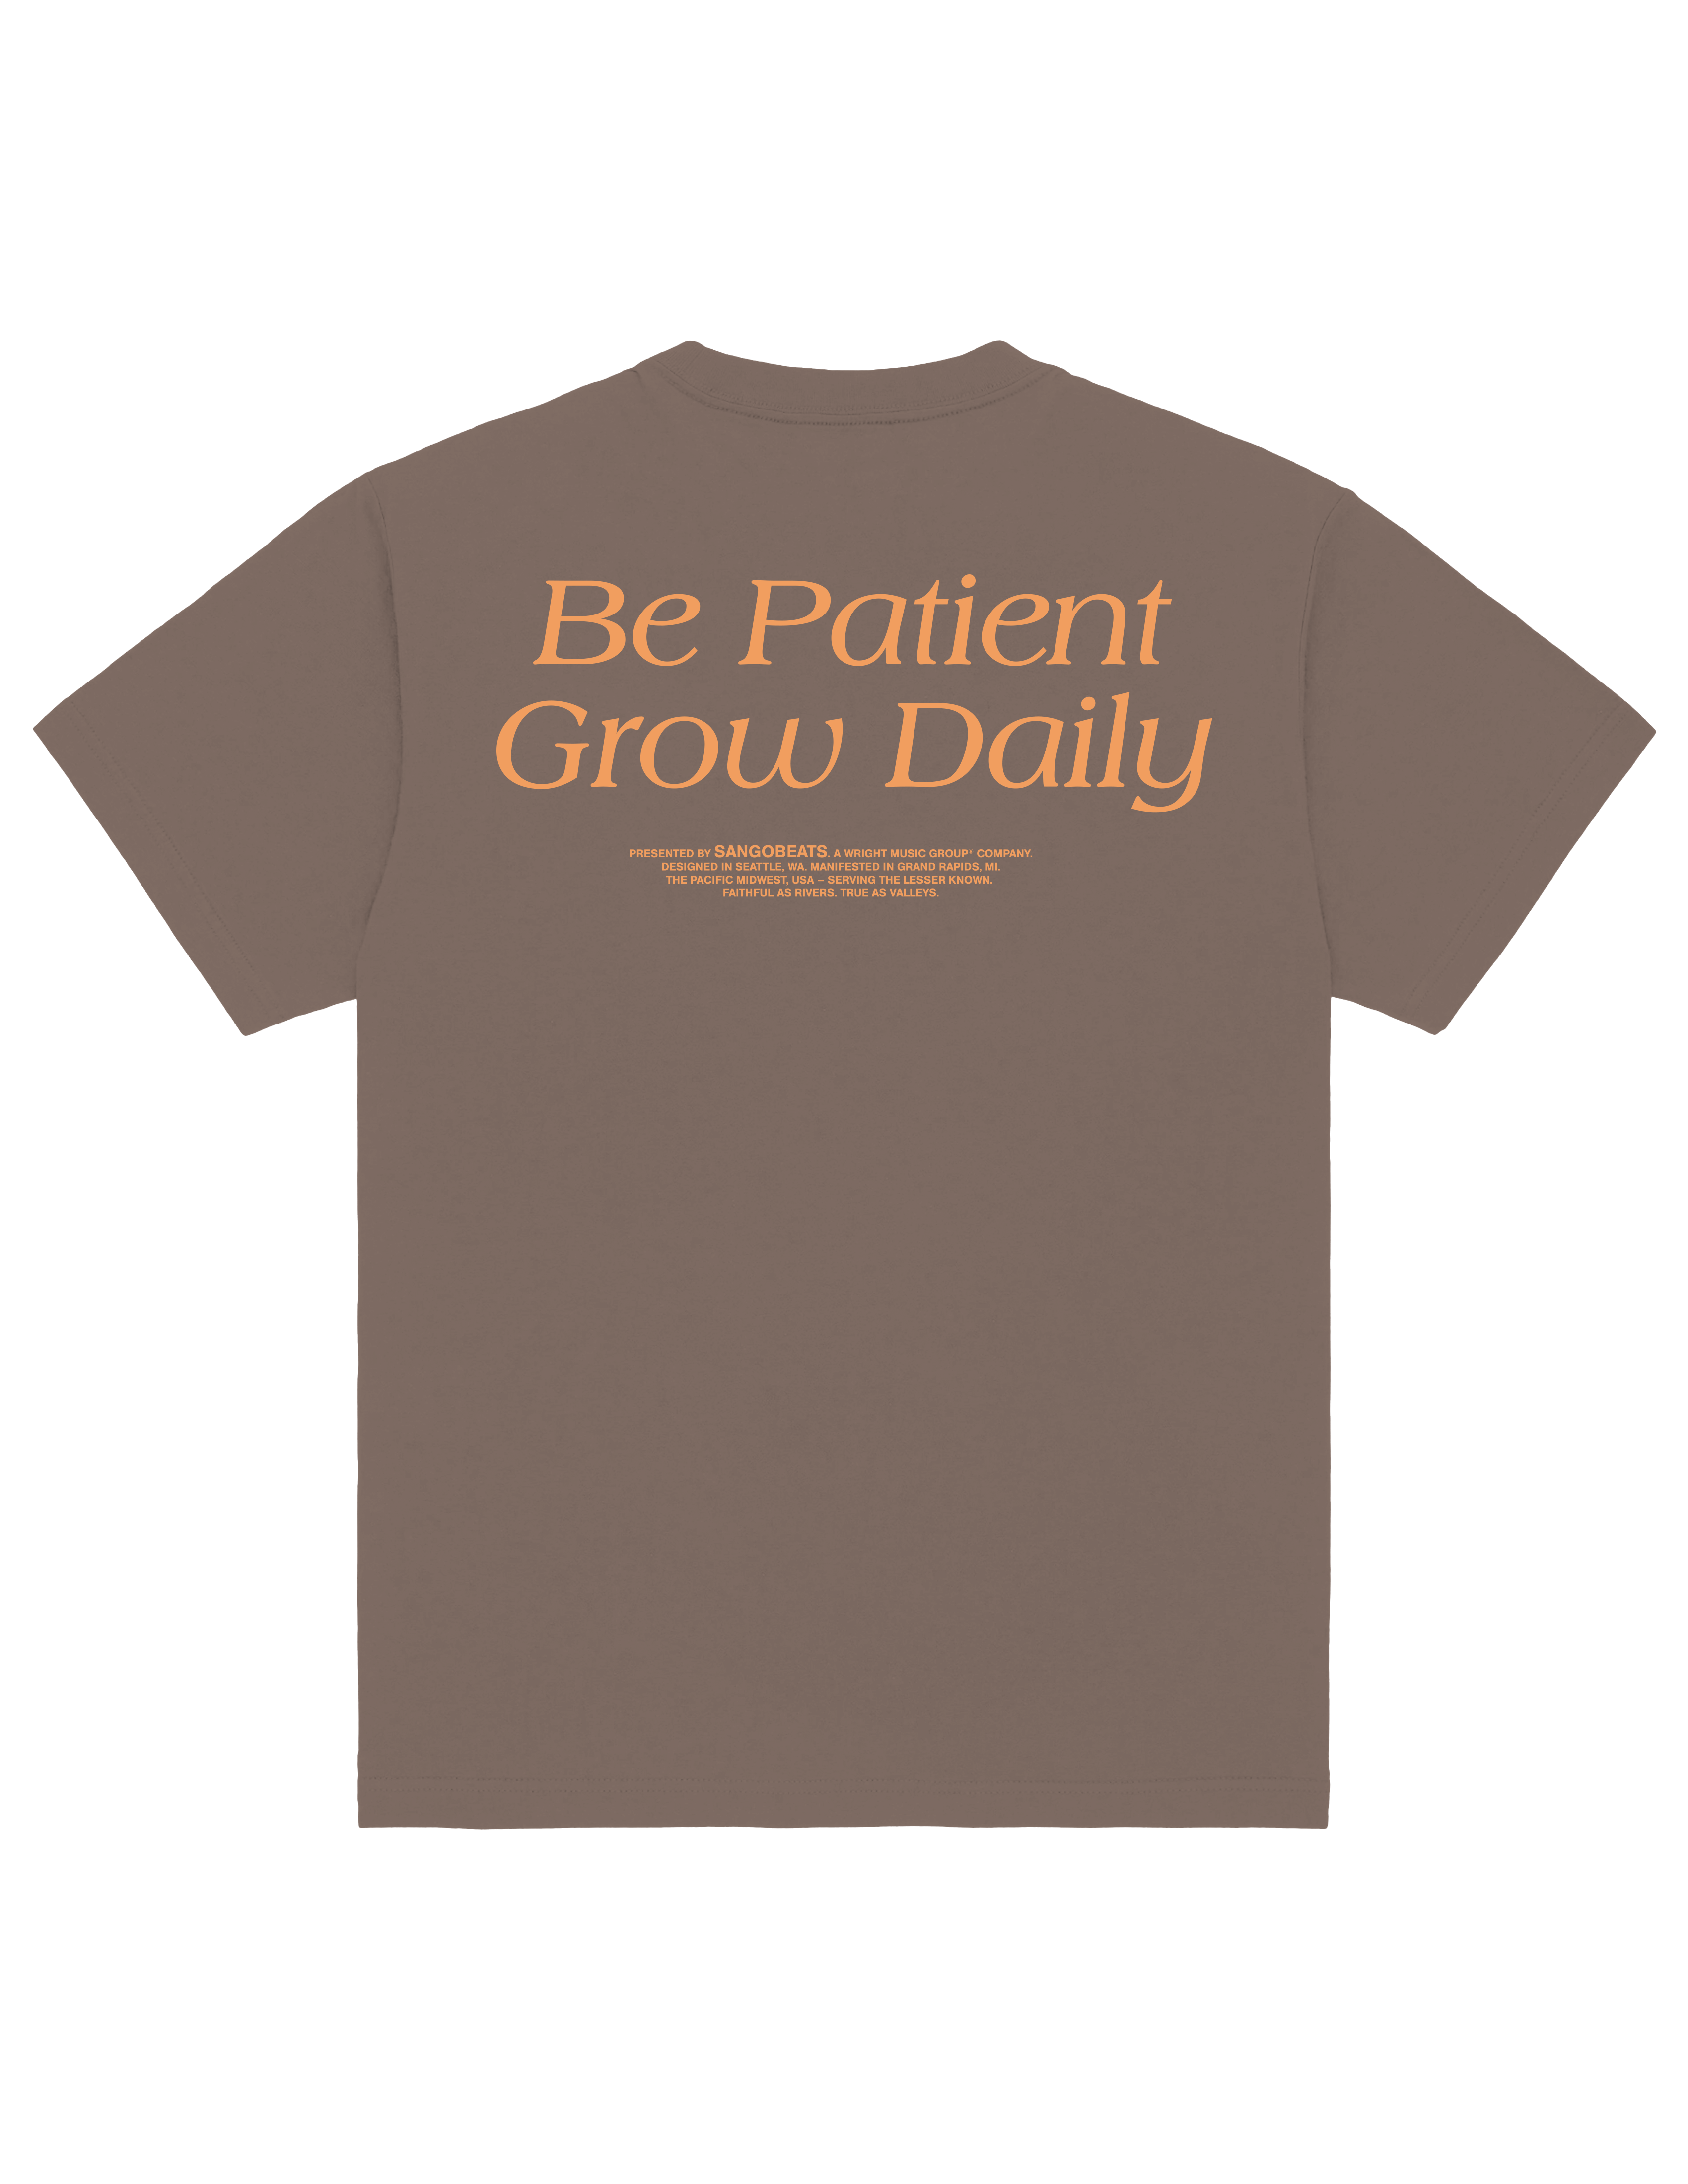 Be Patient, Grow Daily Tee - Patchouli